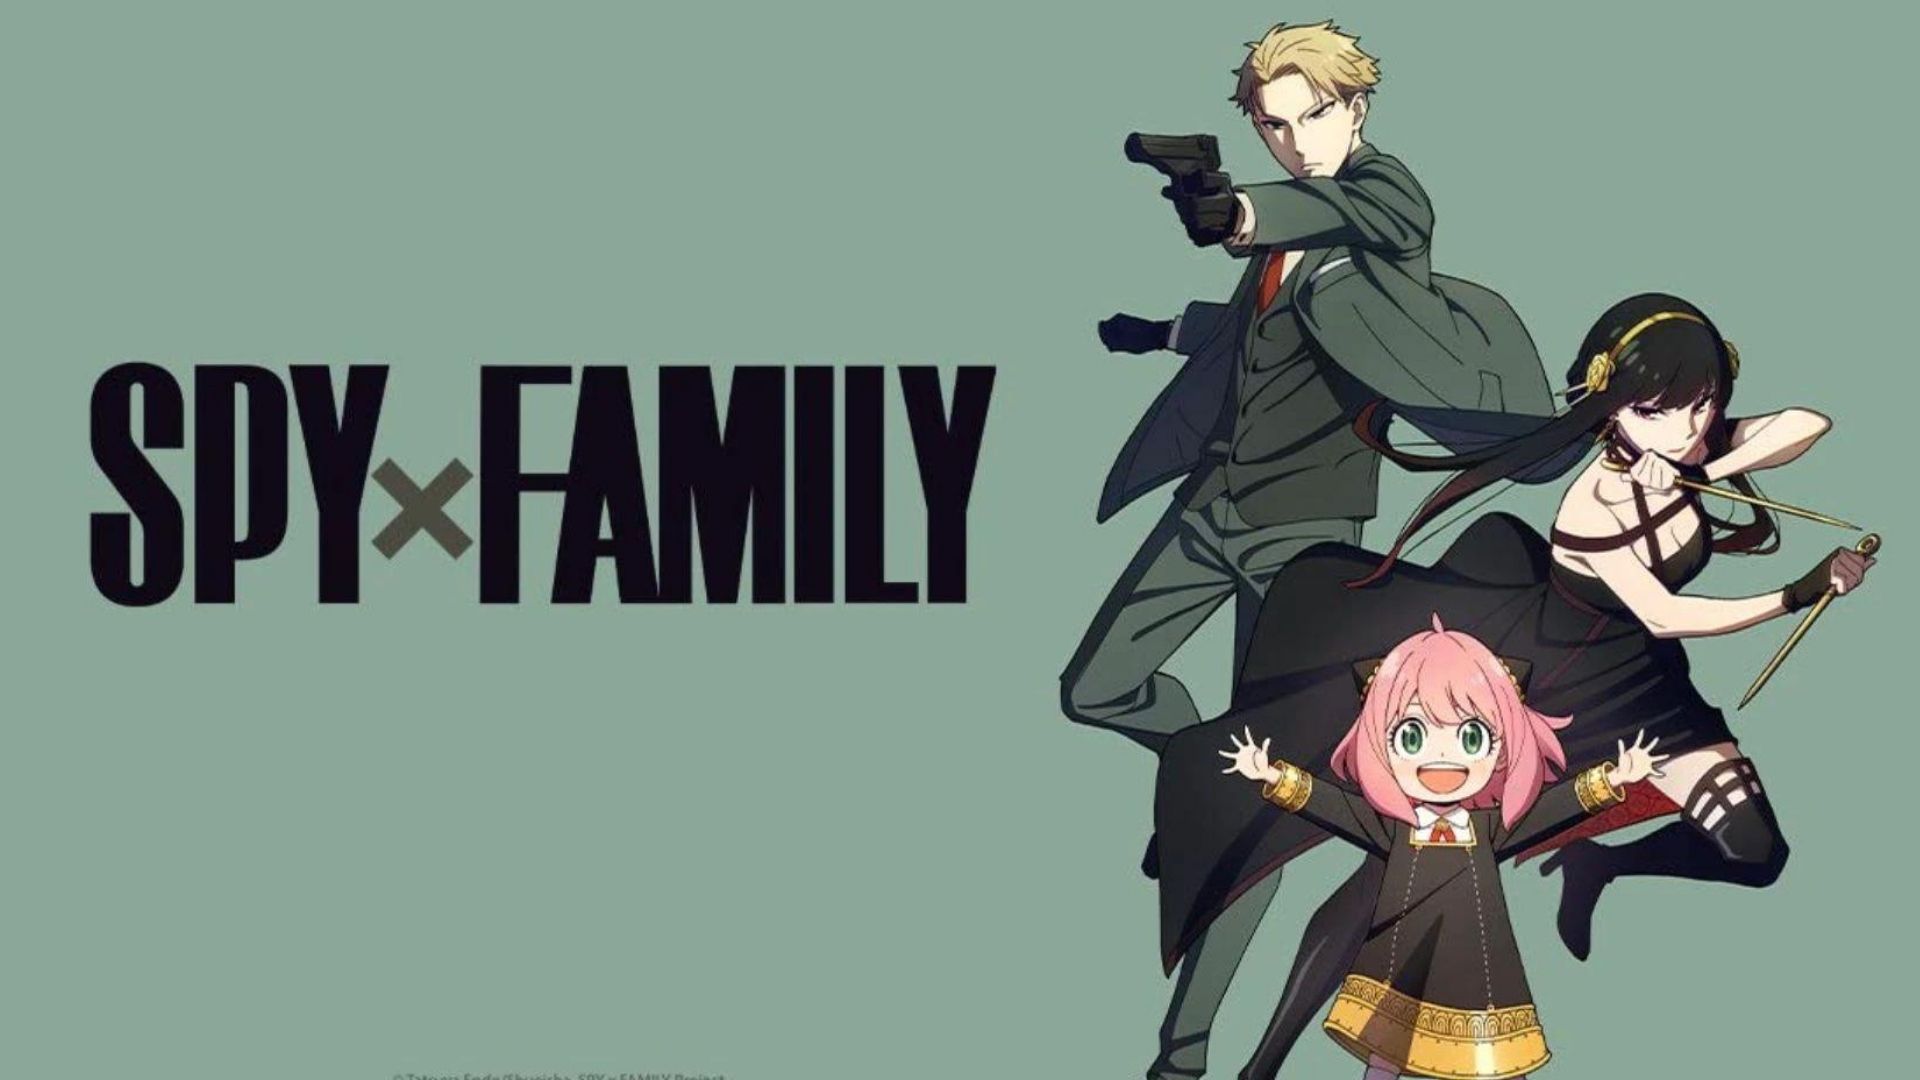 Spy x Family anime cafe opening, non-secret agents welcome too